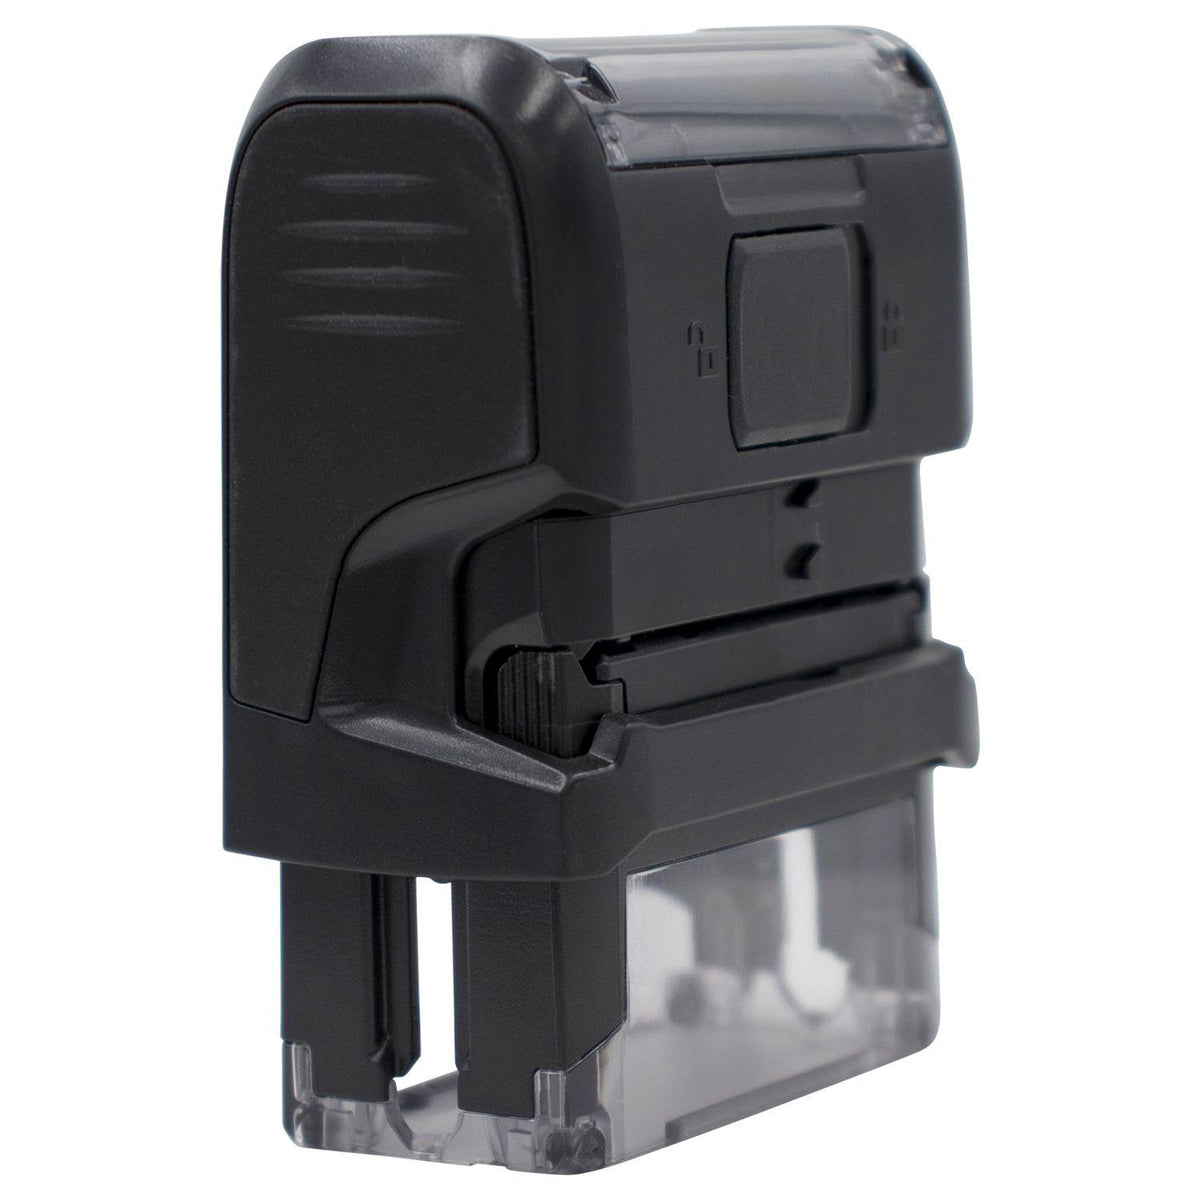 Self-Inking Unclassified Stamp - Engineer Seal Stamps - Brand_Trodat, Impression Size_Small, Stamp Type_Self-Inking Stamp, Type of Use_General, Type of Use_Office